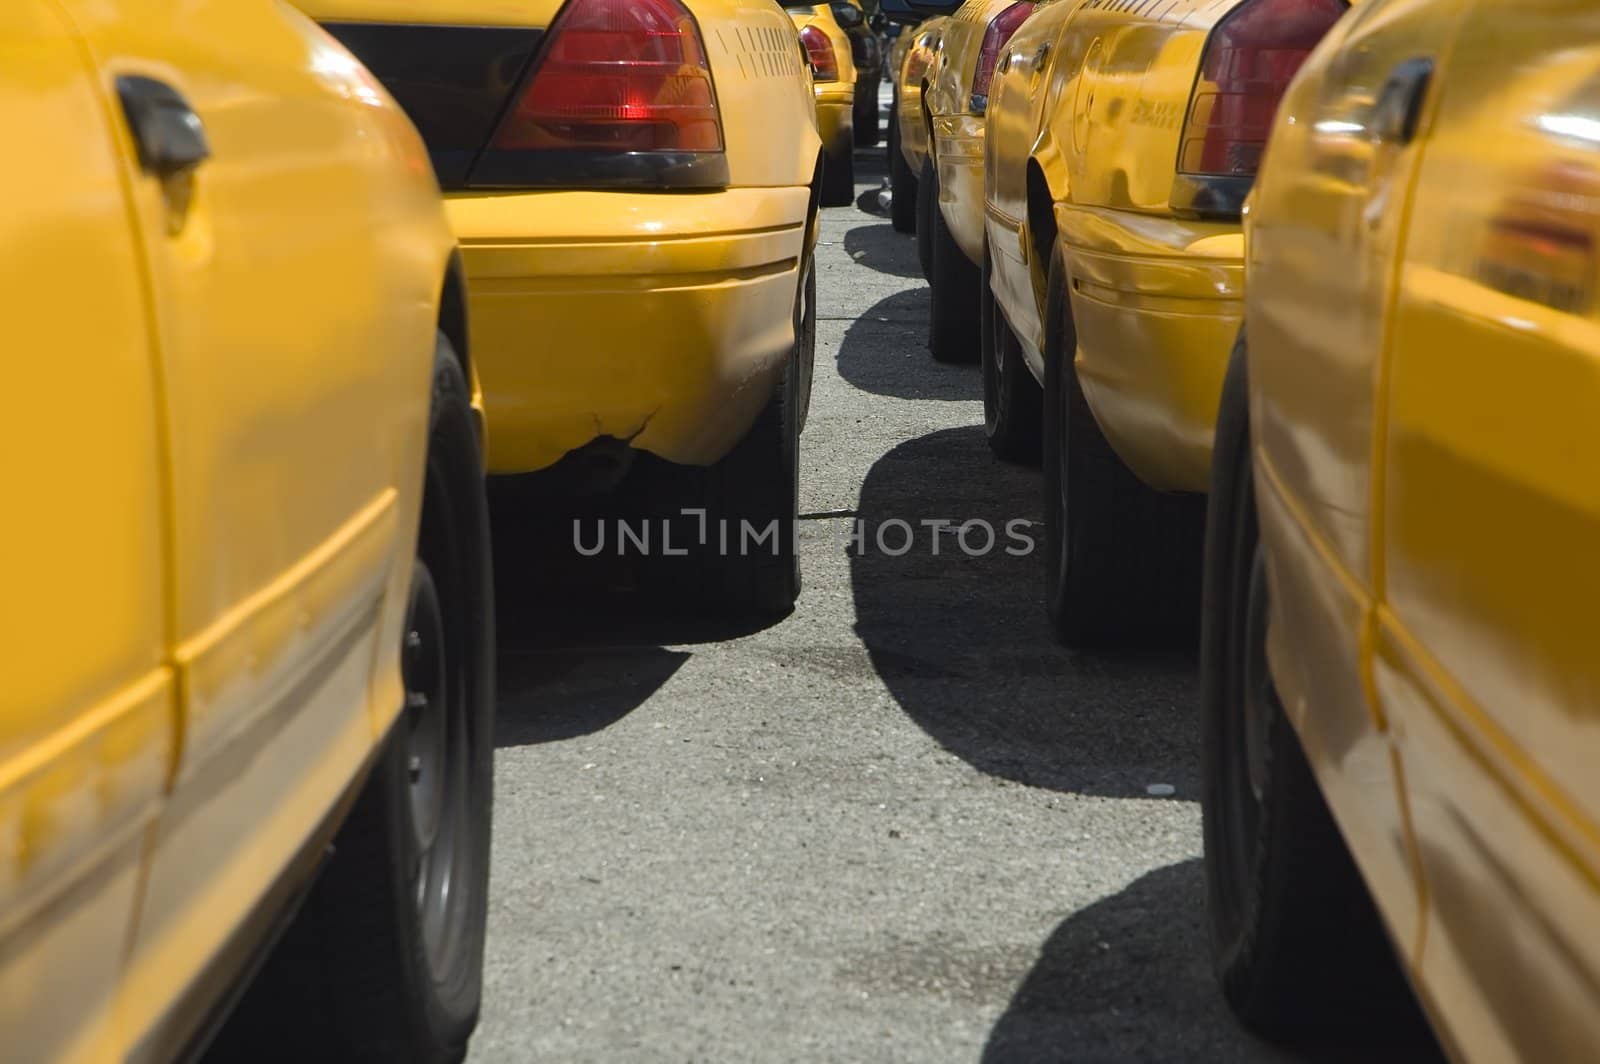 yellow cabs in new york, no protected material